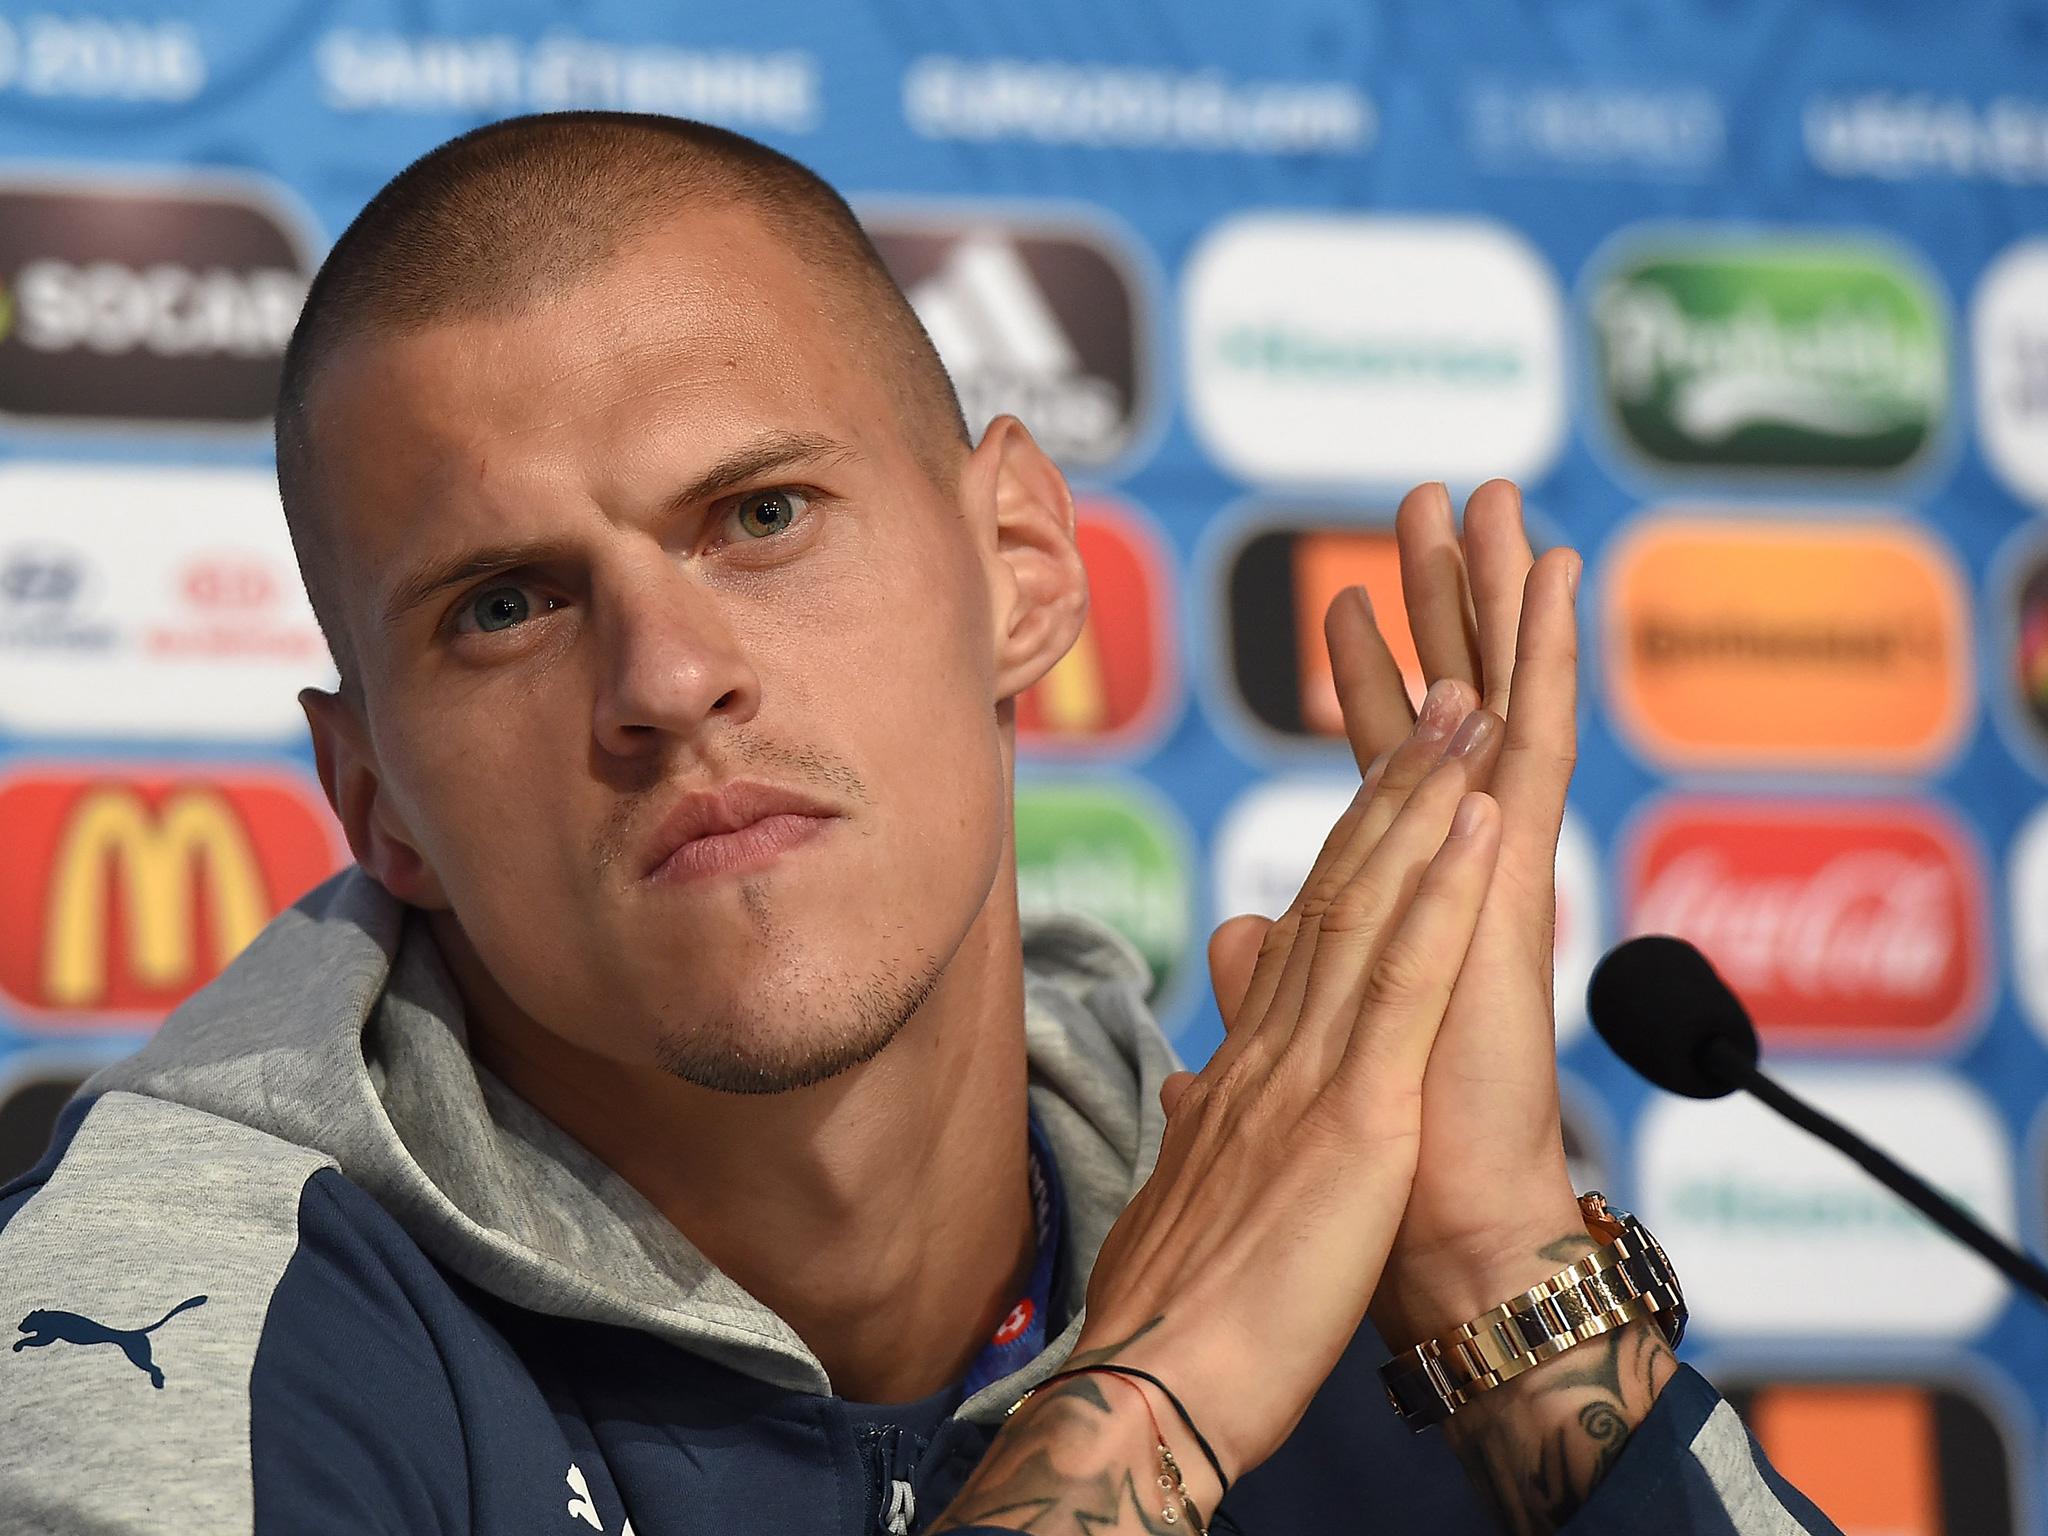 Skrtel is expected to leave Liverpool this summer